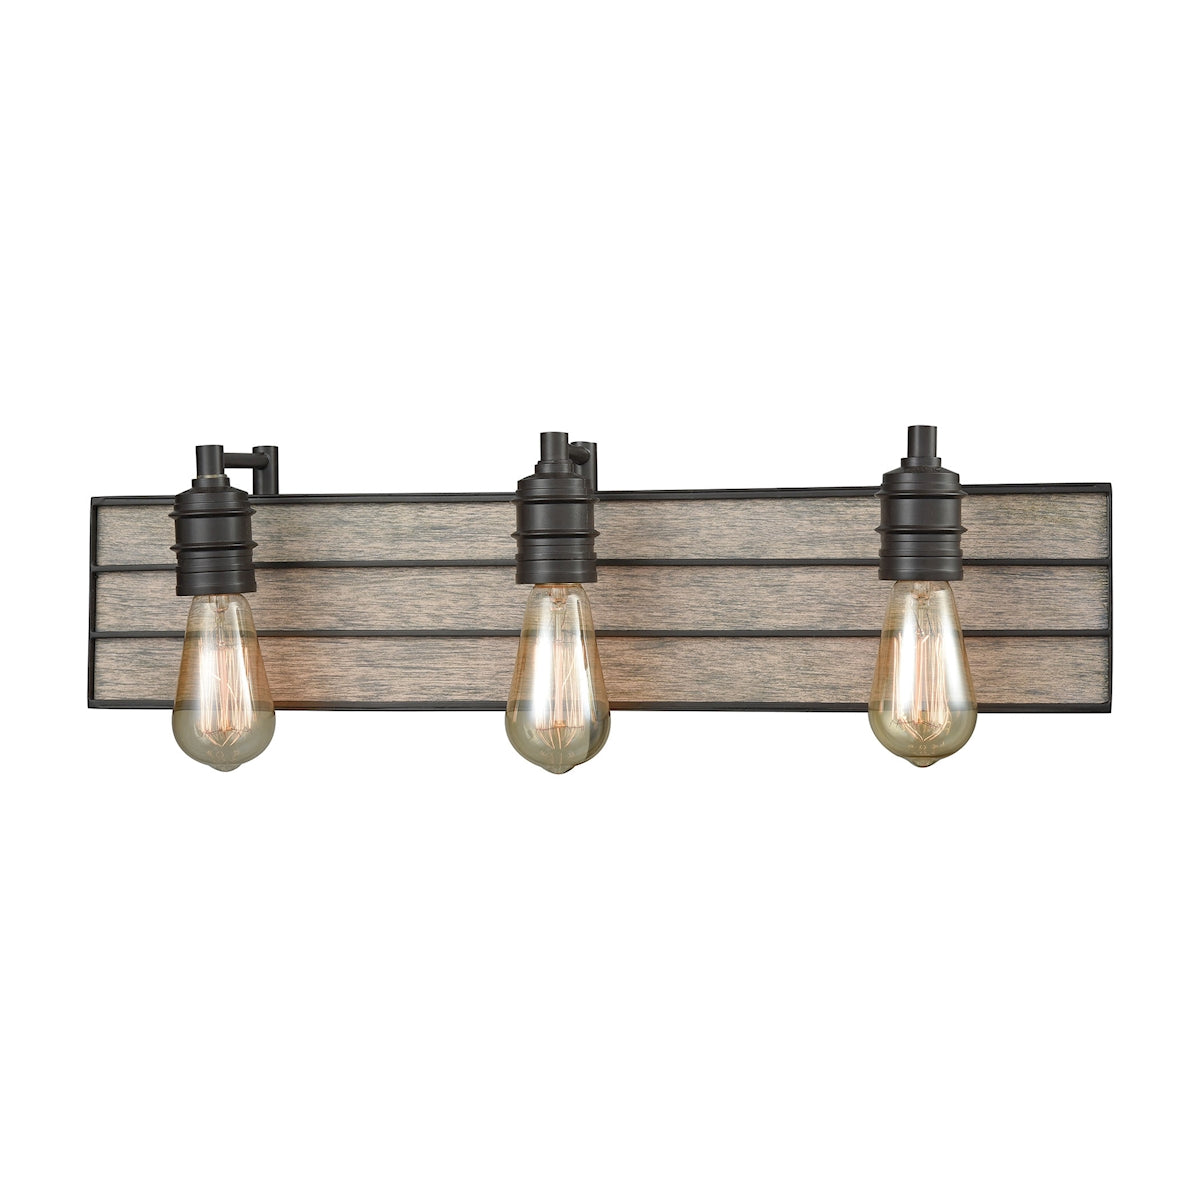 ELK Lighting 16441/3 Brookweiler 3-Light Vanity Sconce in Oil Rubbed Bronze with Washed Wood Backplate